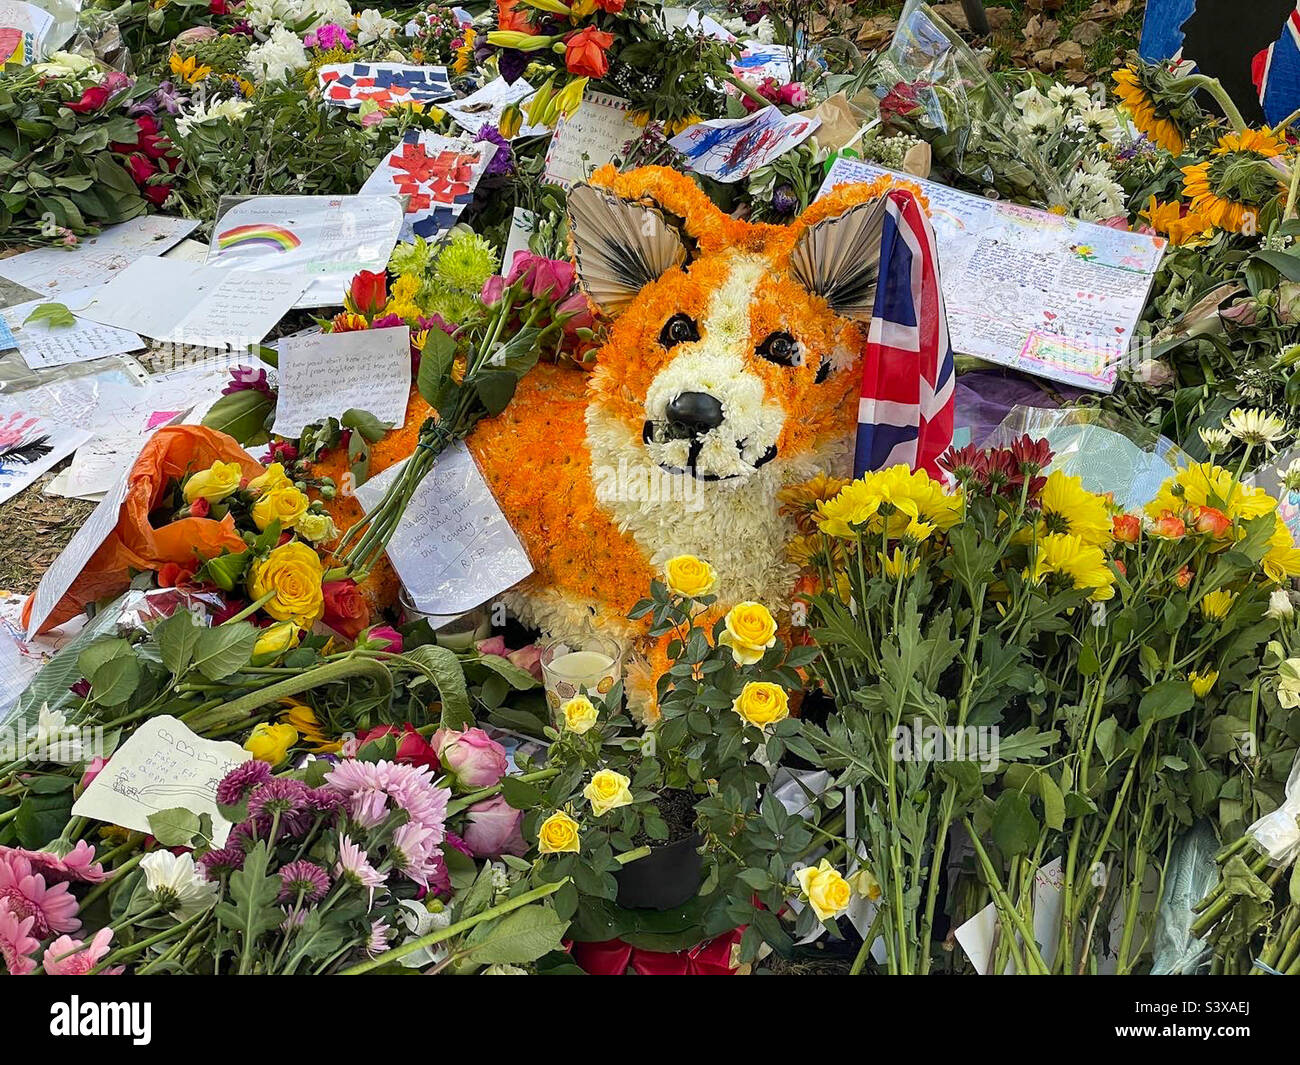 Corgi dog amongst the floral tributes for The Queen, Green Park, London 17 September 2022 Stock Photo